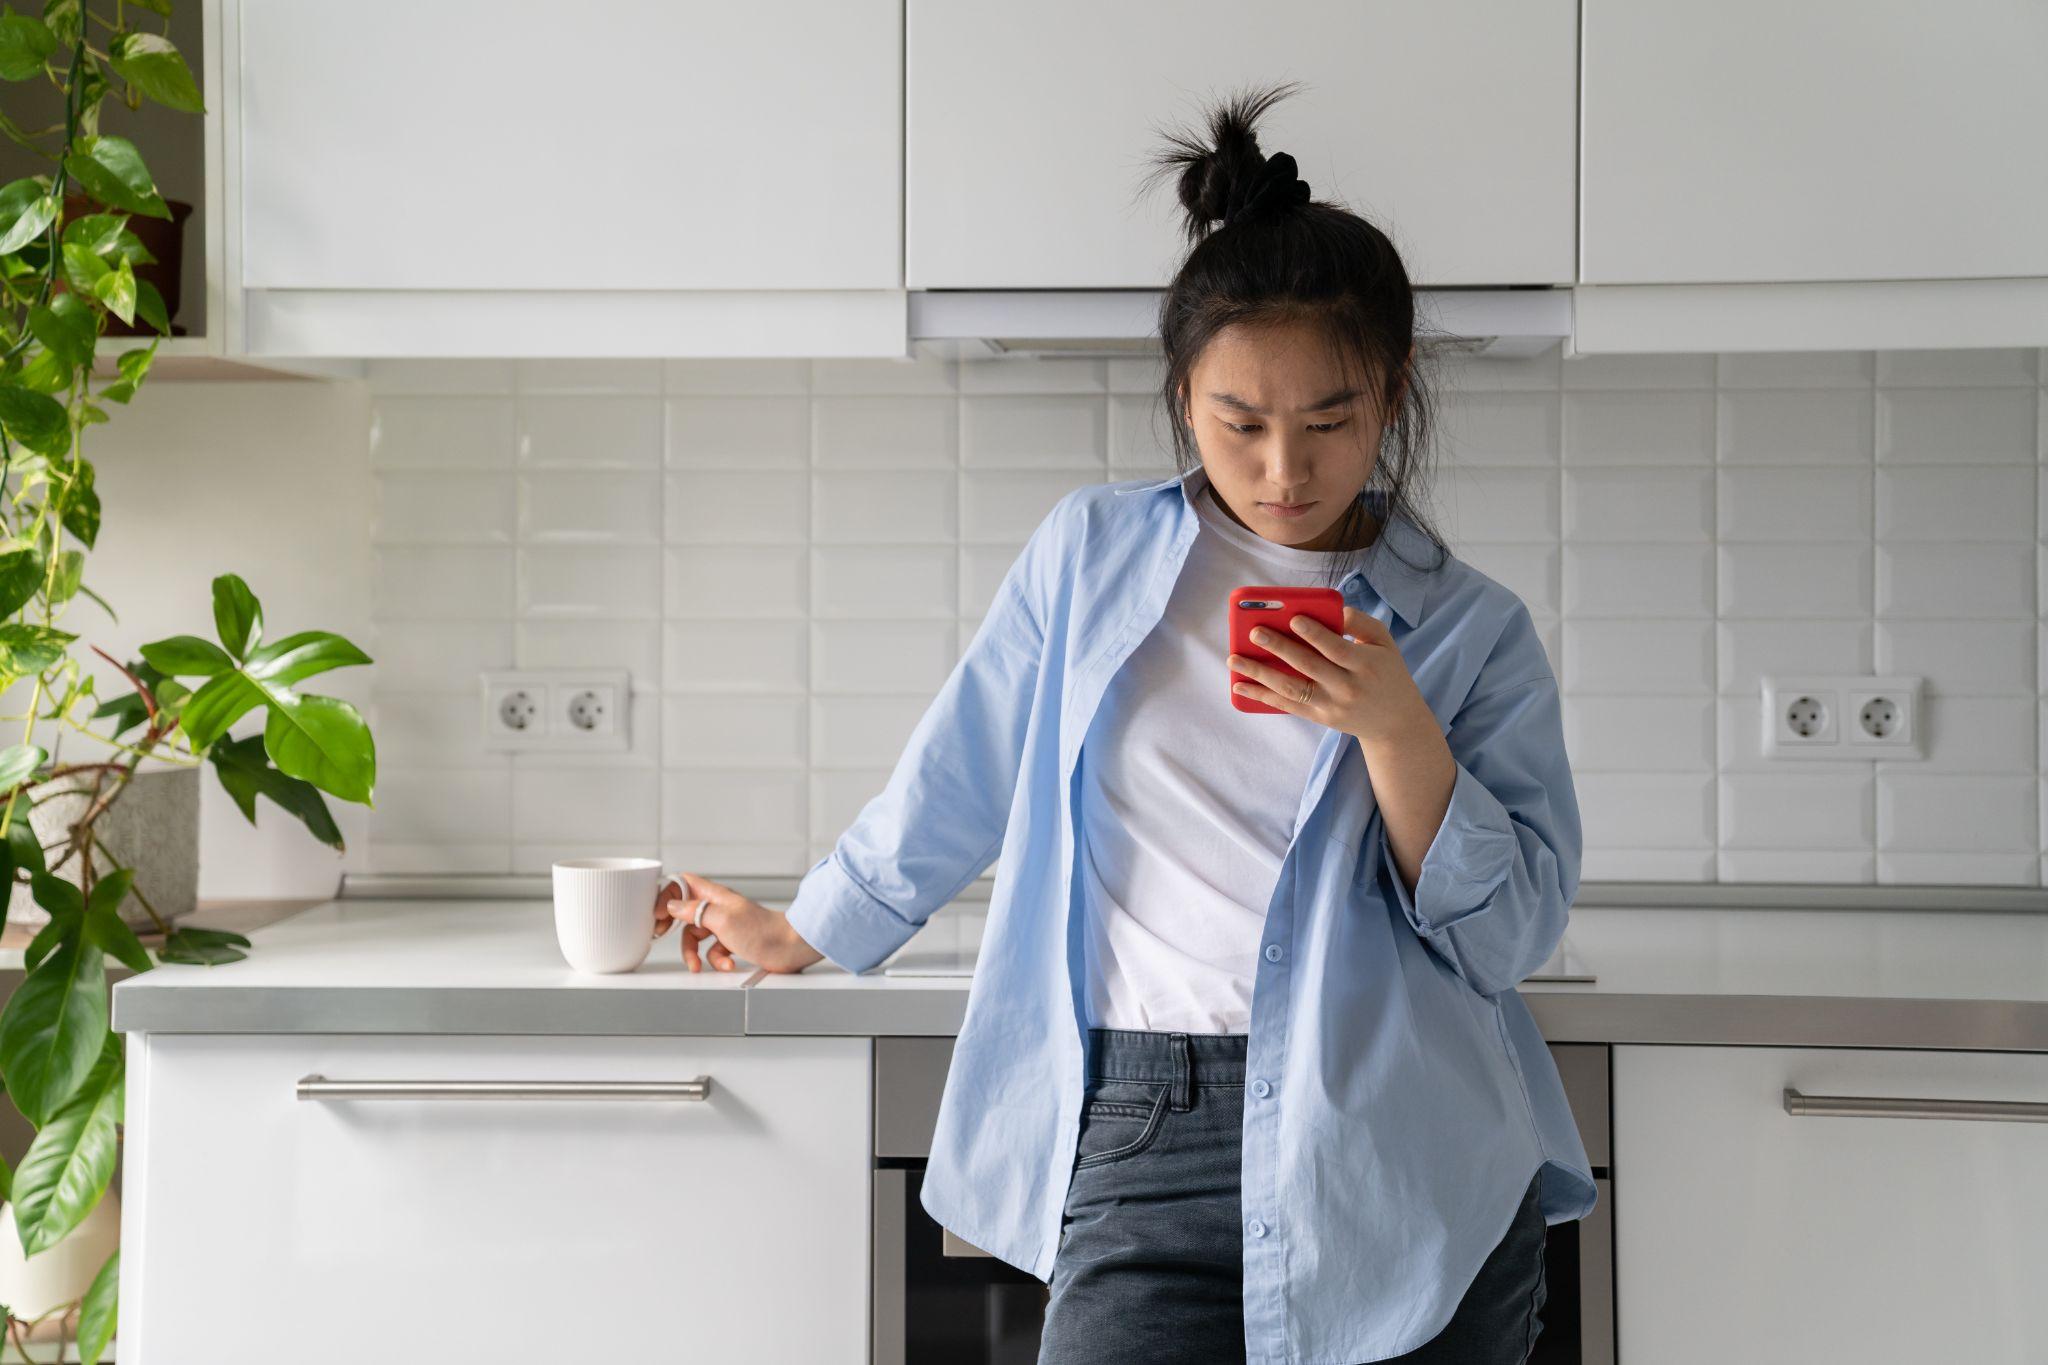 Upset young Asian woman standing in kitchen holding mobile phone